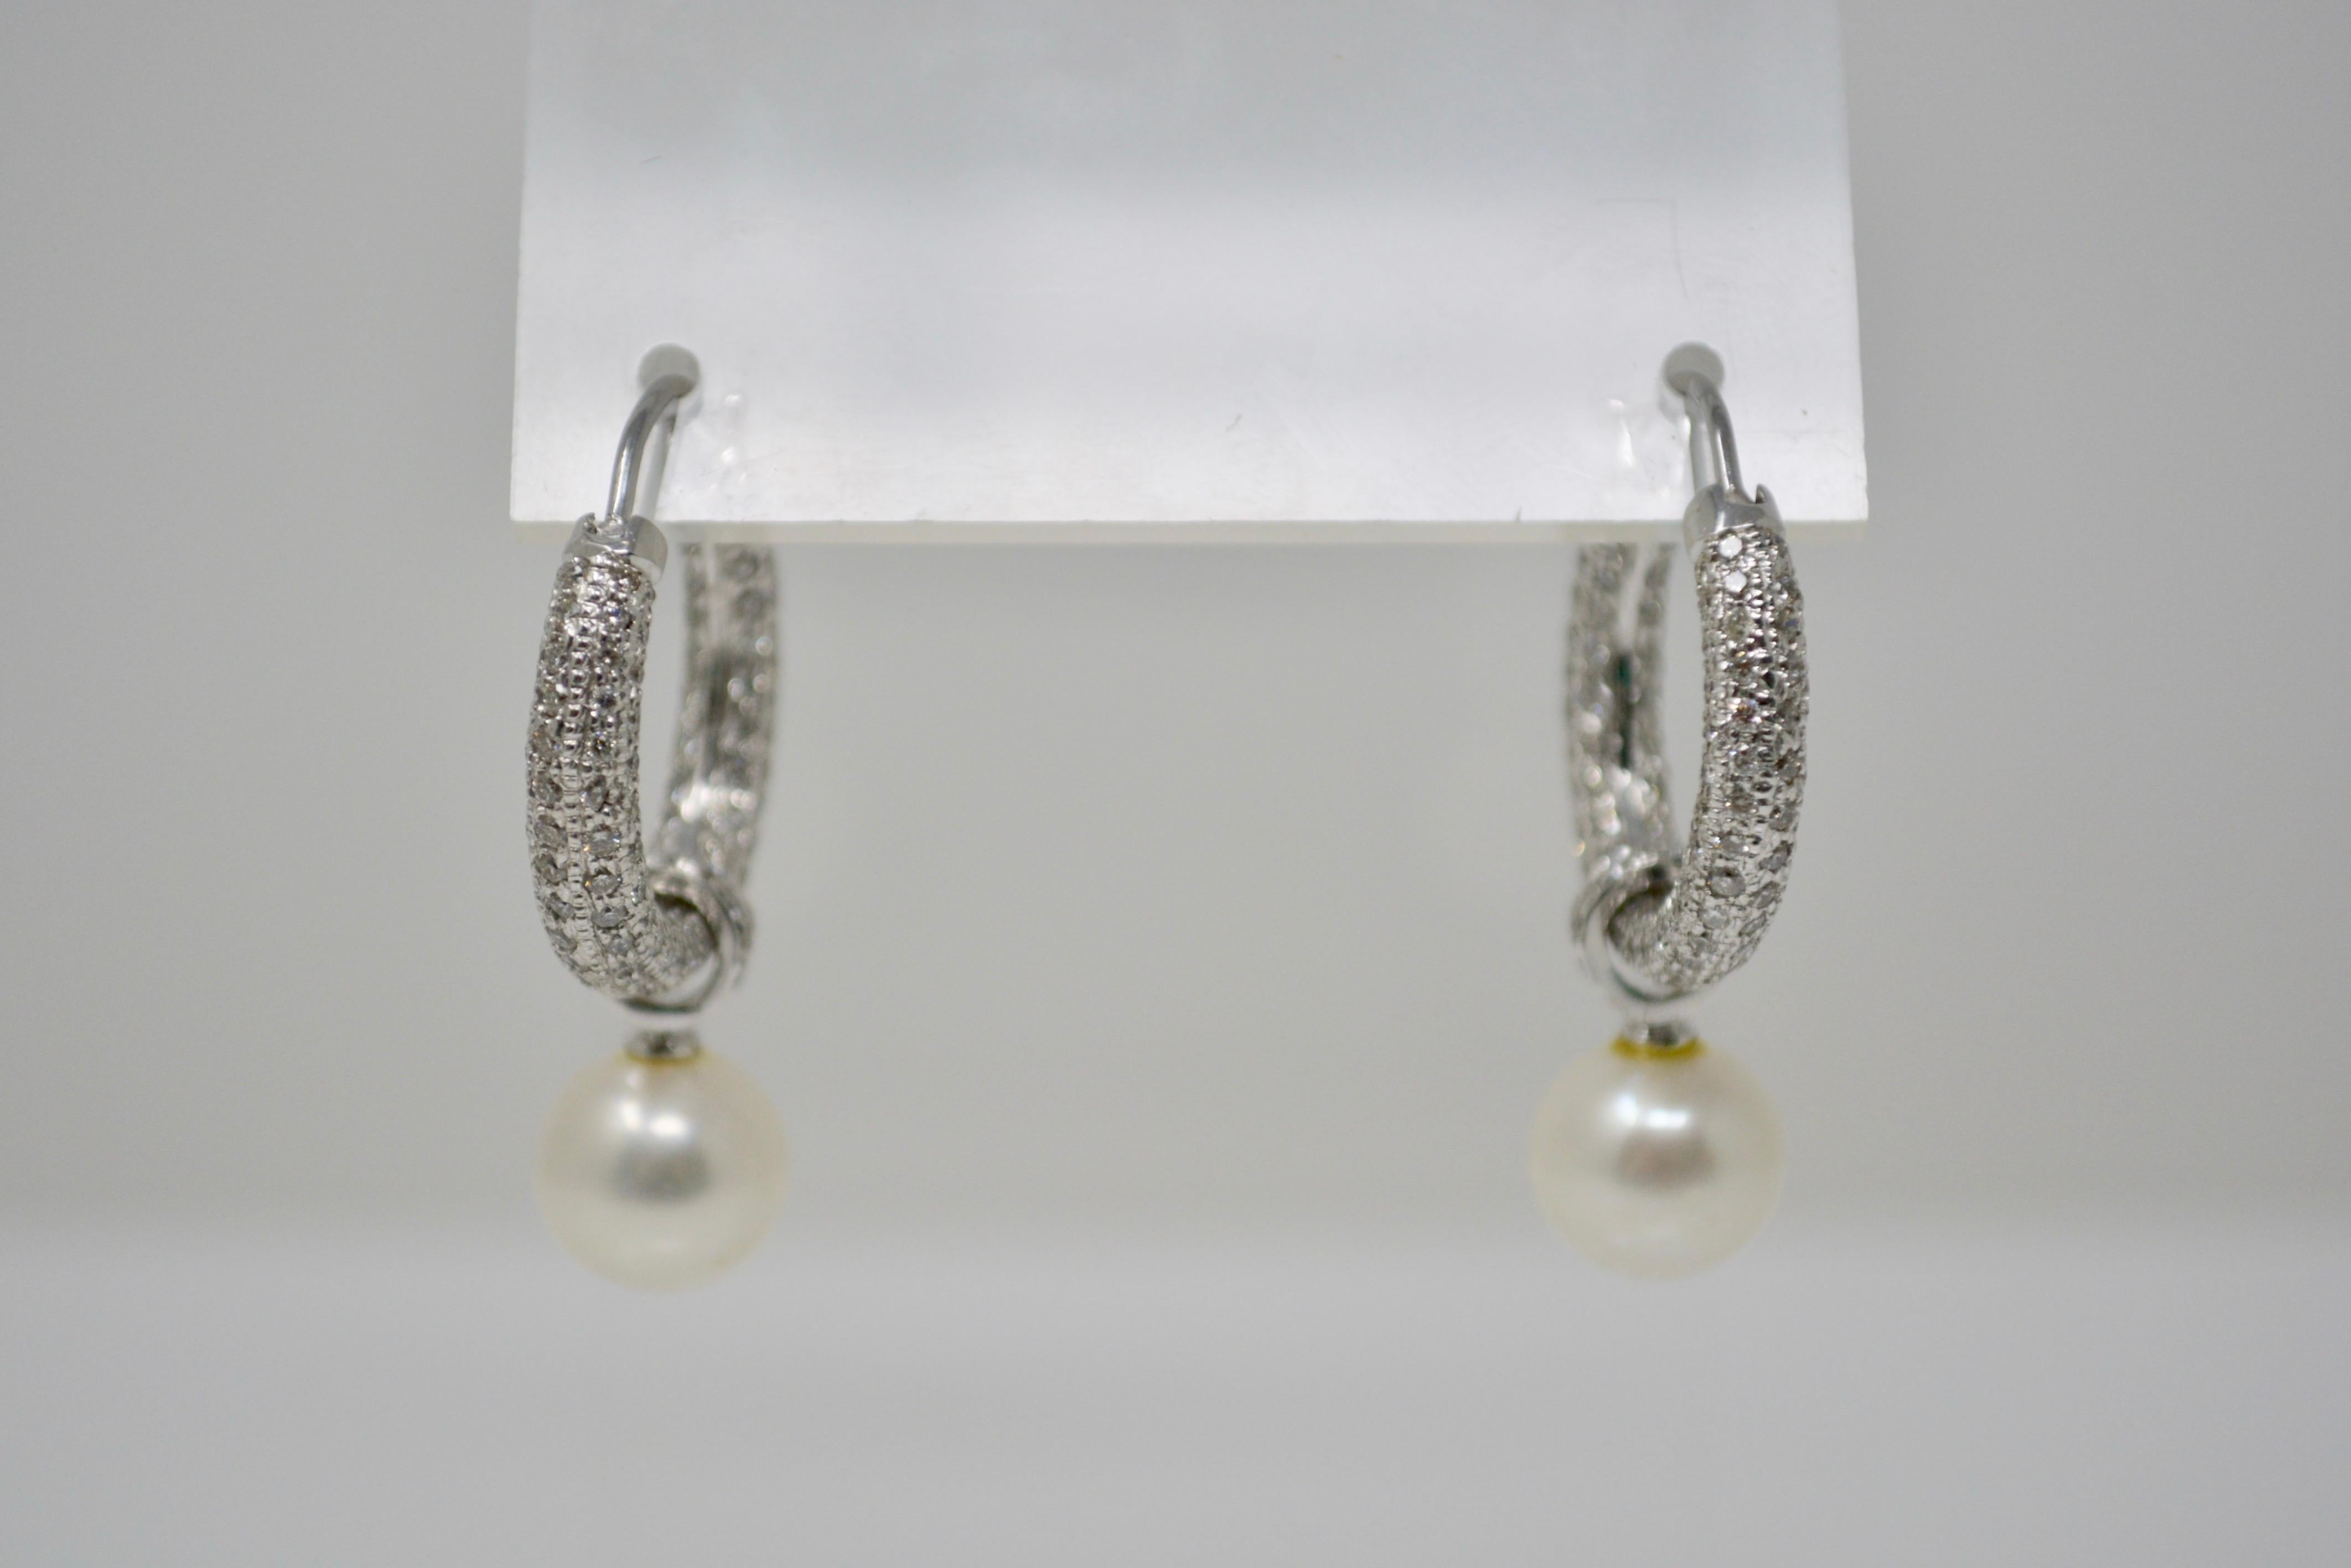 Contemporary 3 Carat White Diamond and South Sea Pearl Detachable Hoop Earrings in 18 Karat